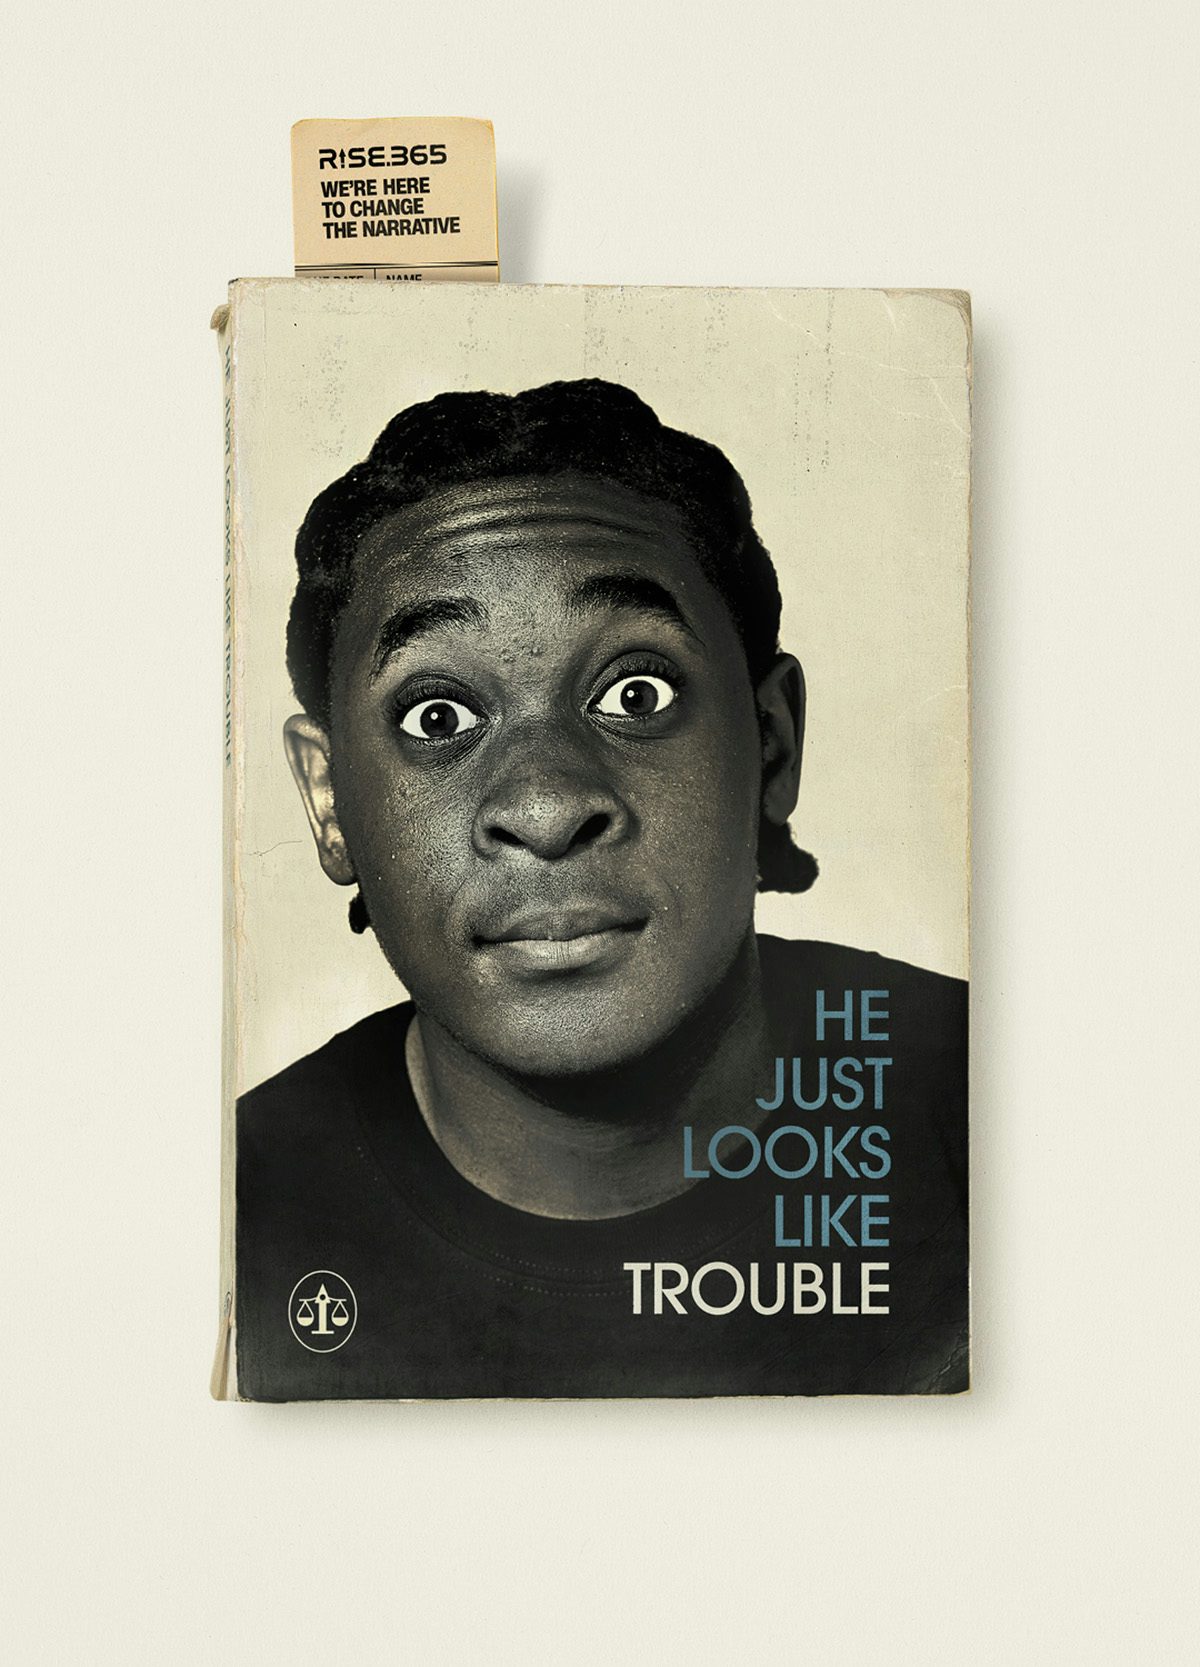 Image from the Rise.365 campaign by M&C Saatchi based on a book cover design with a headline based on racial stereotypes